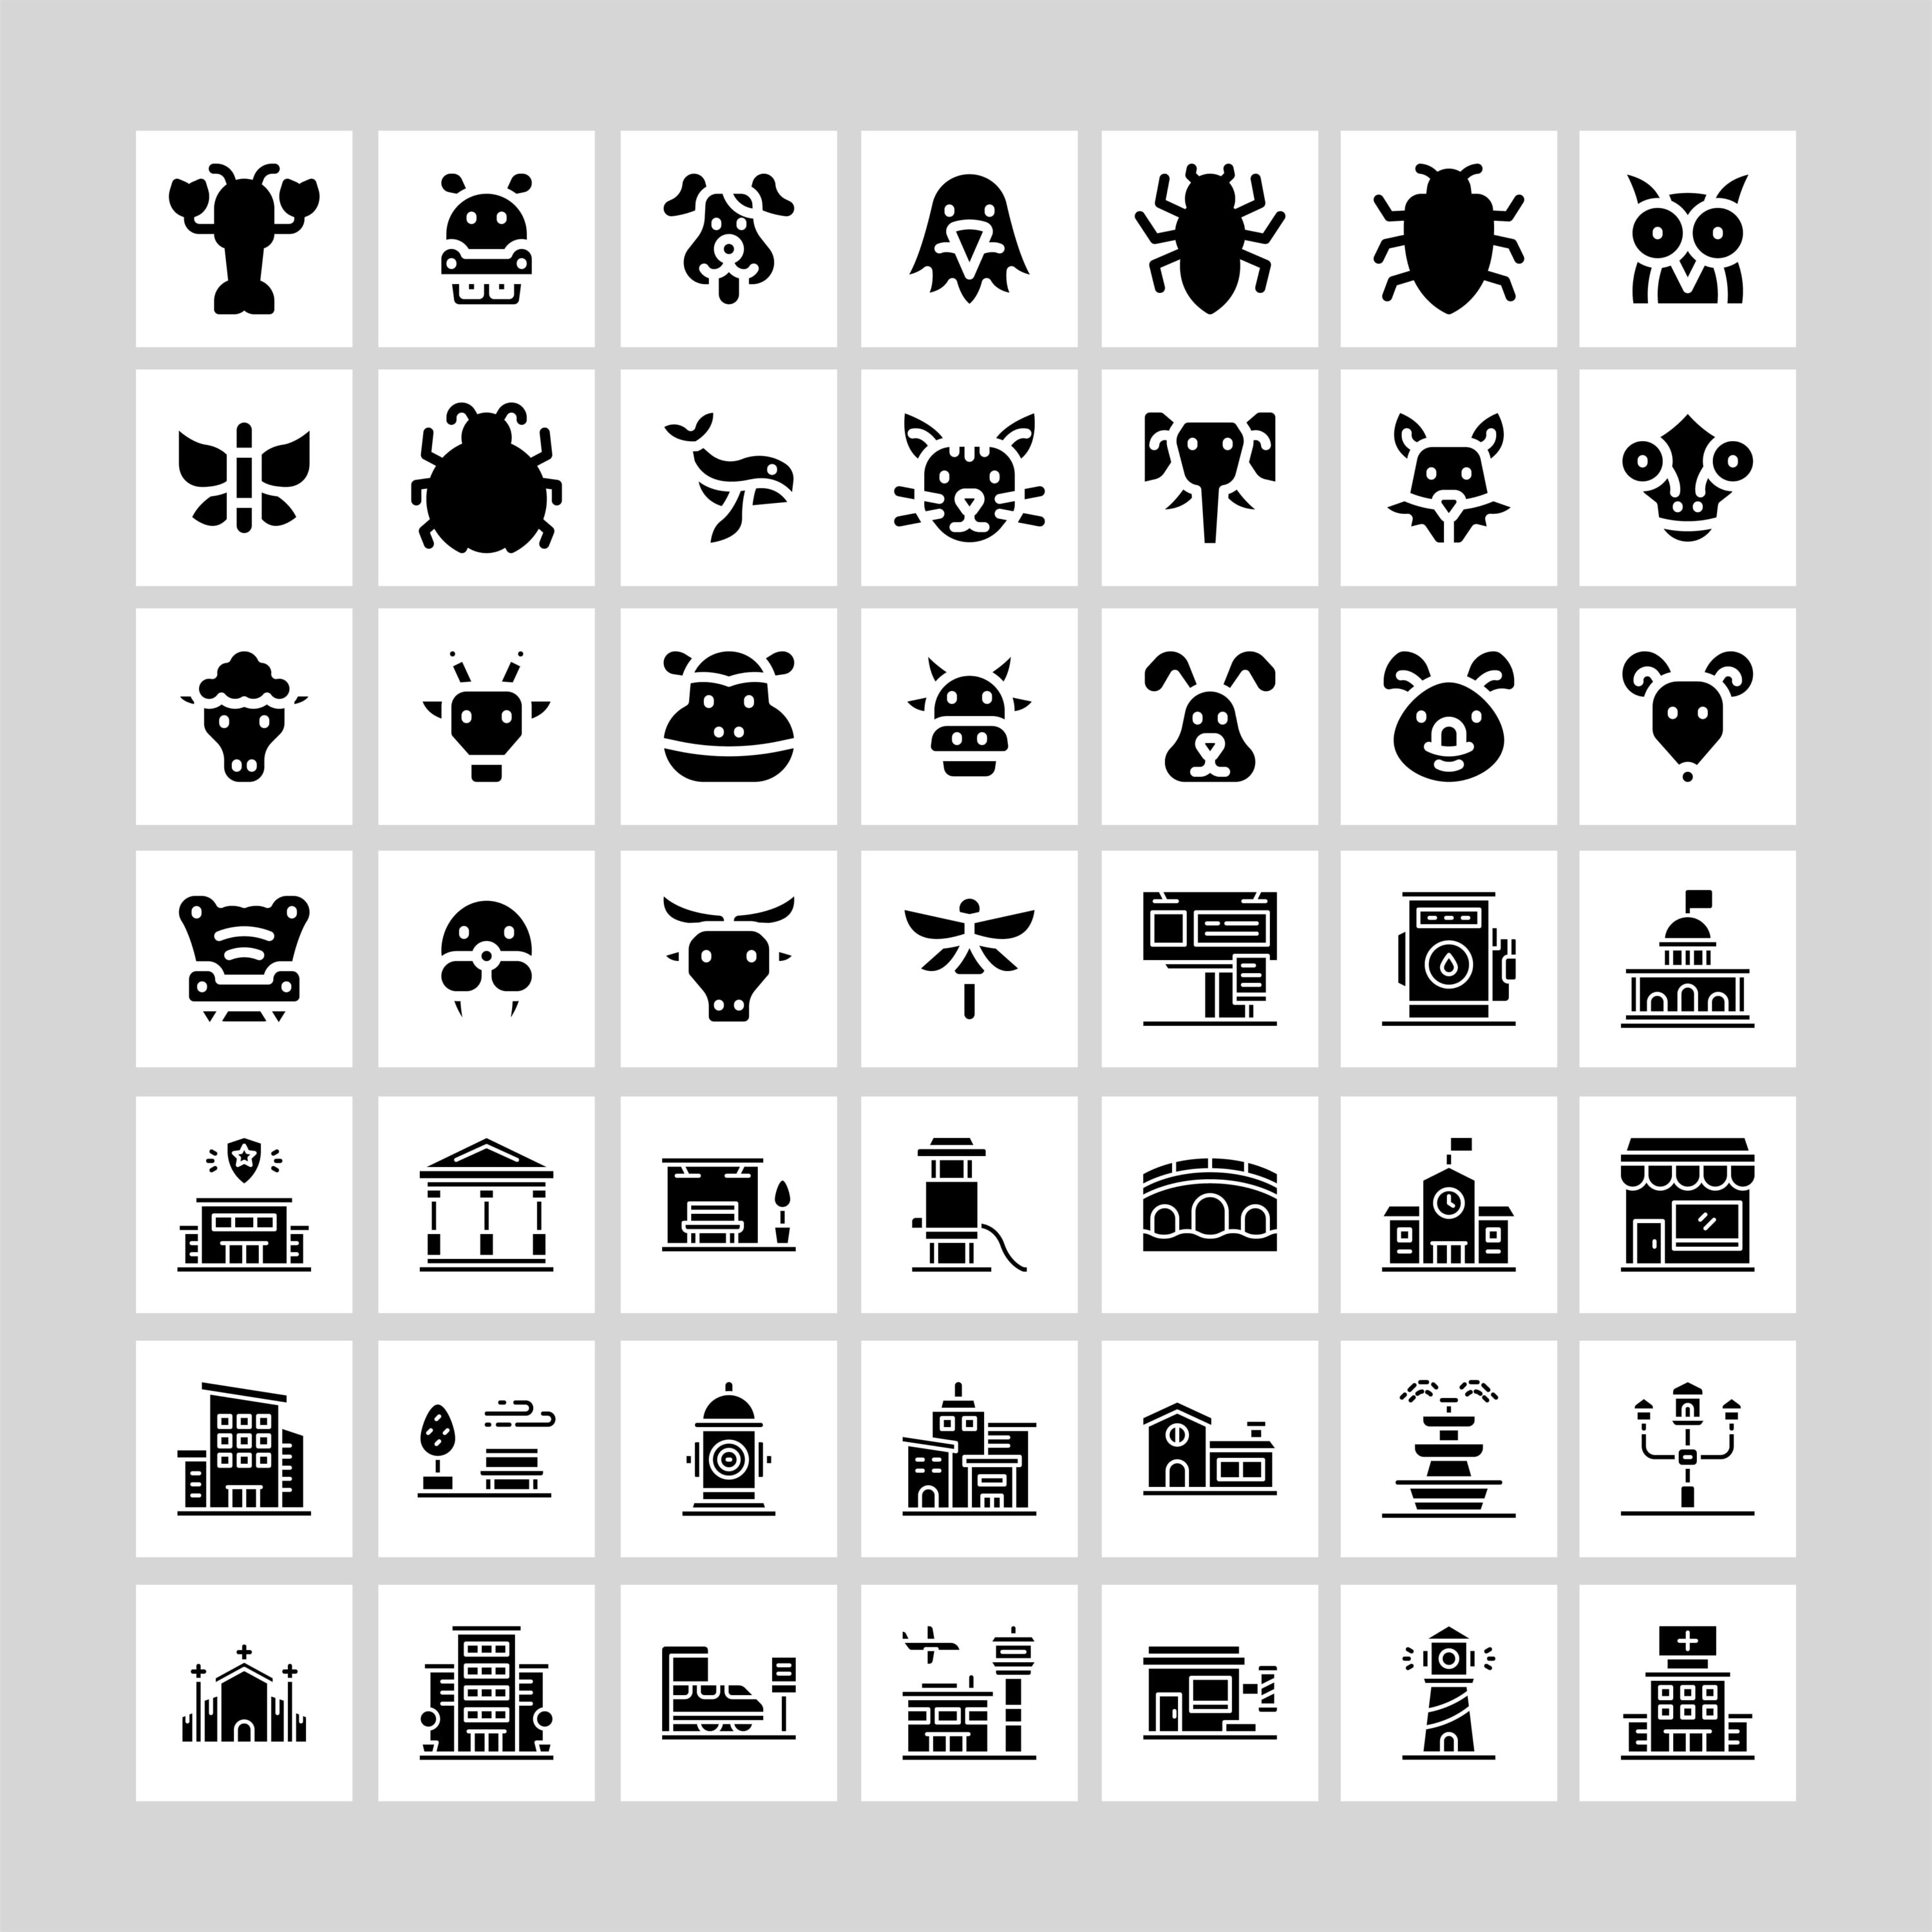 Awesome Solid Vector Icons cover image.